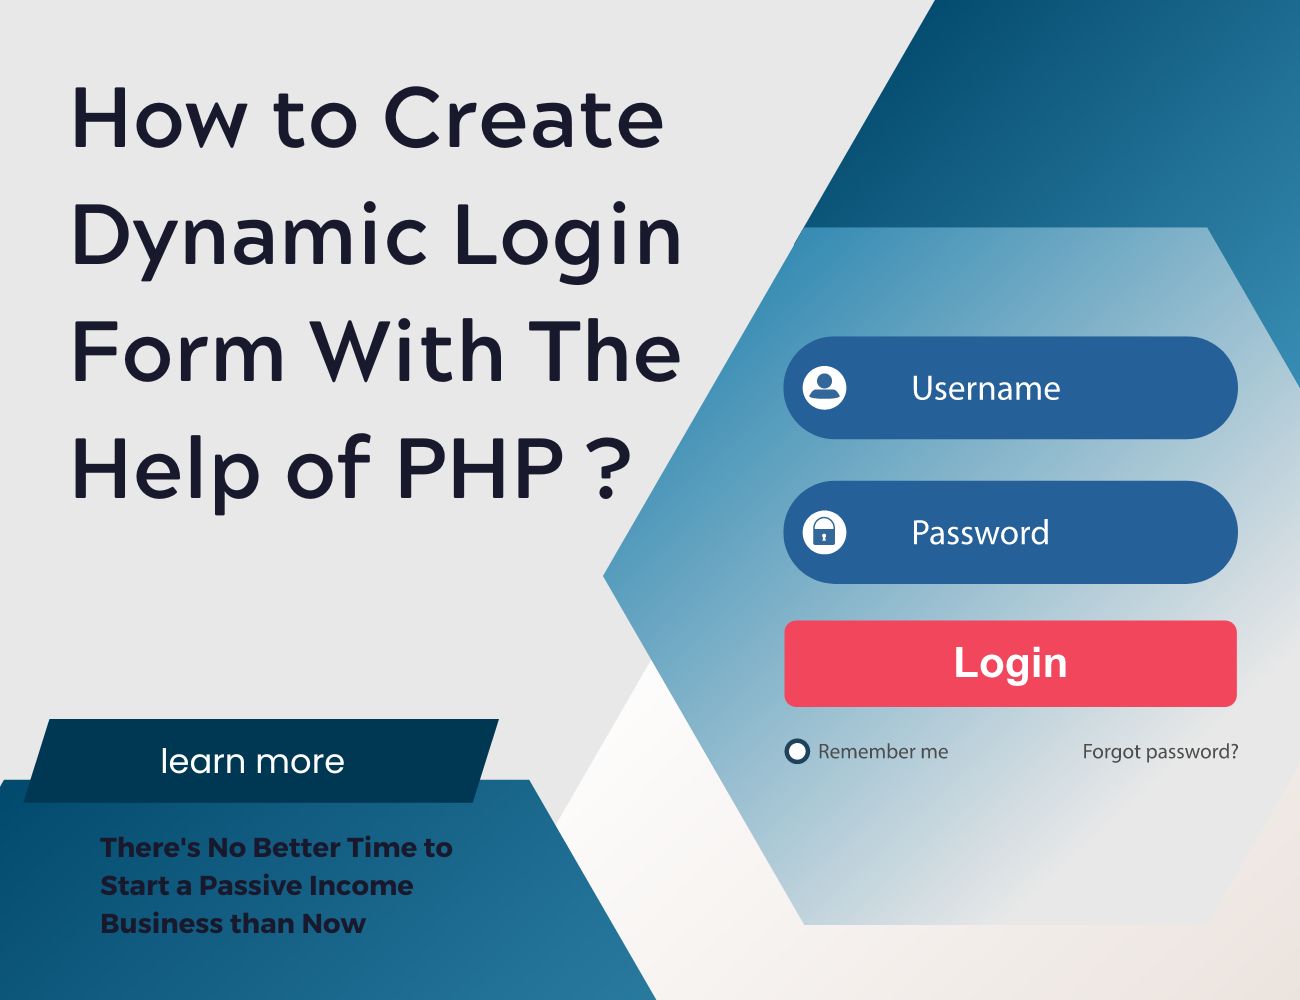 How to Create Dynamic Login Form With The Help of PHP?